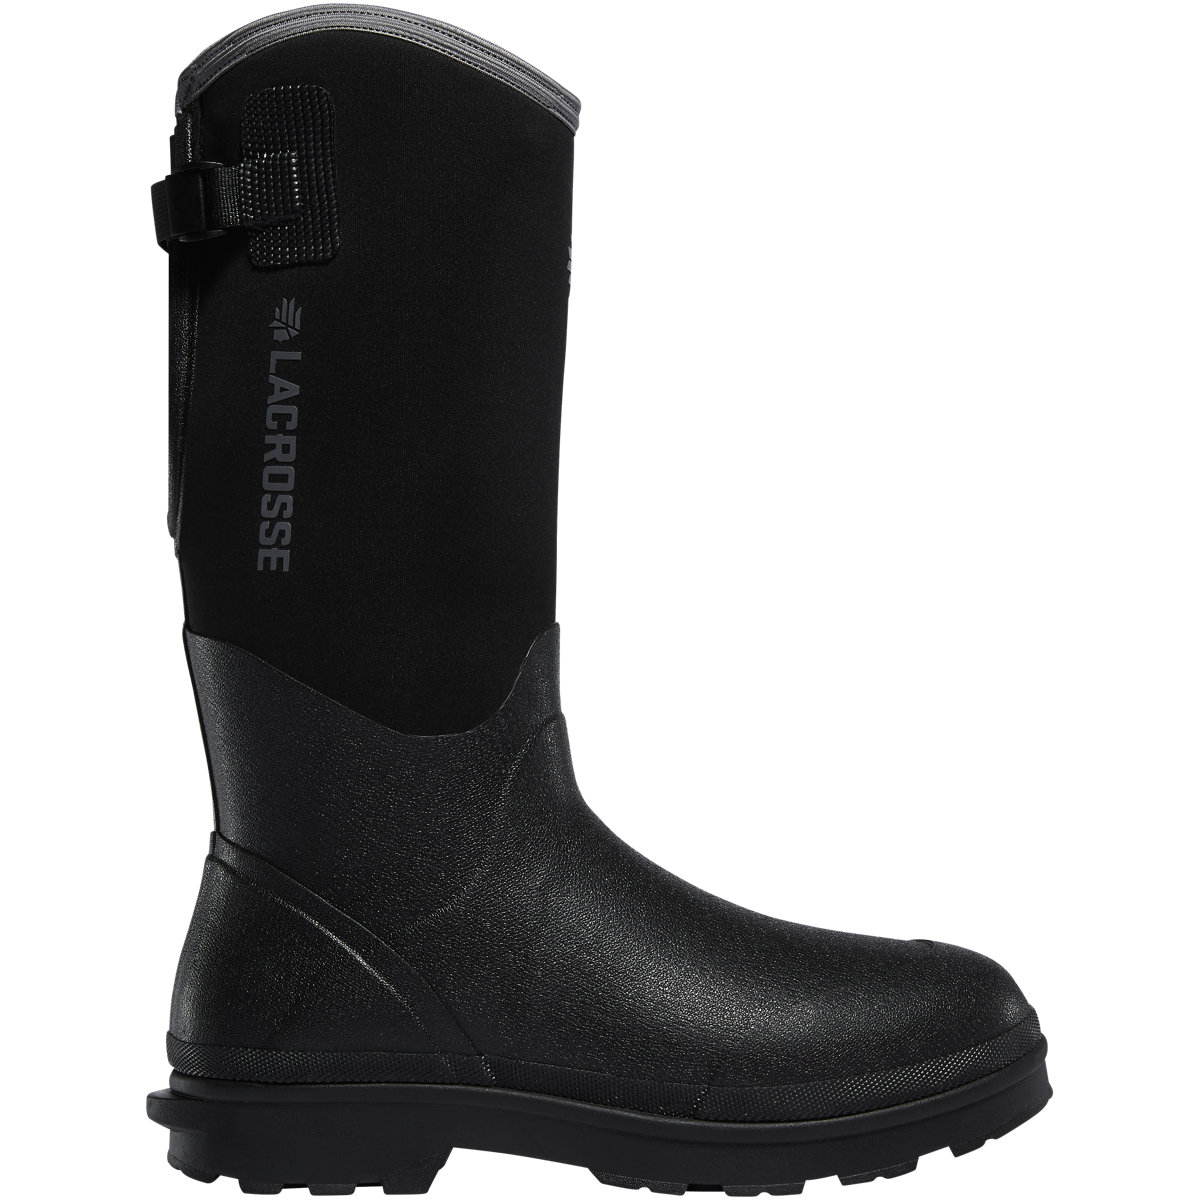 Lacrosse Alpha Range Black 5.0mm Rubber Work Boots with Composite Toe from Columbia Safety